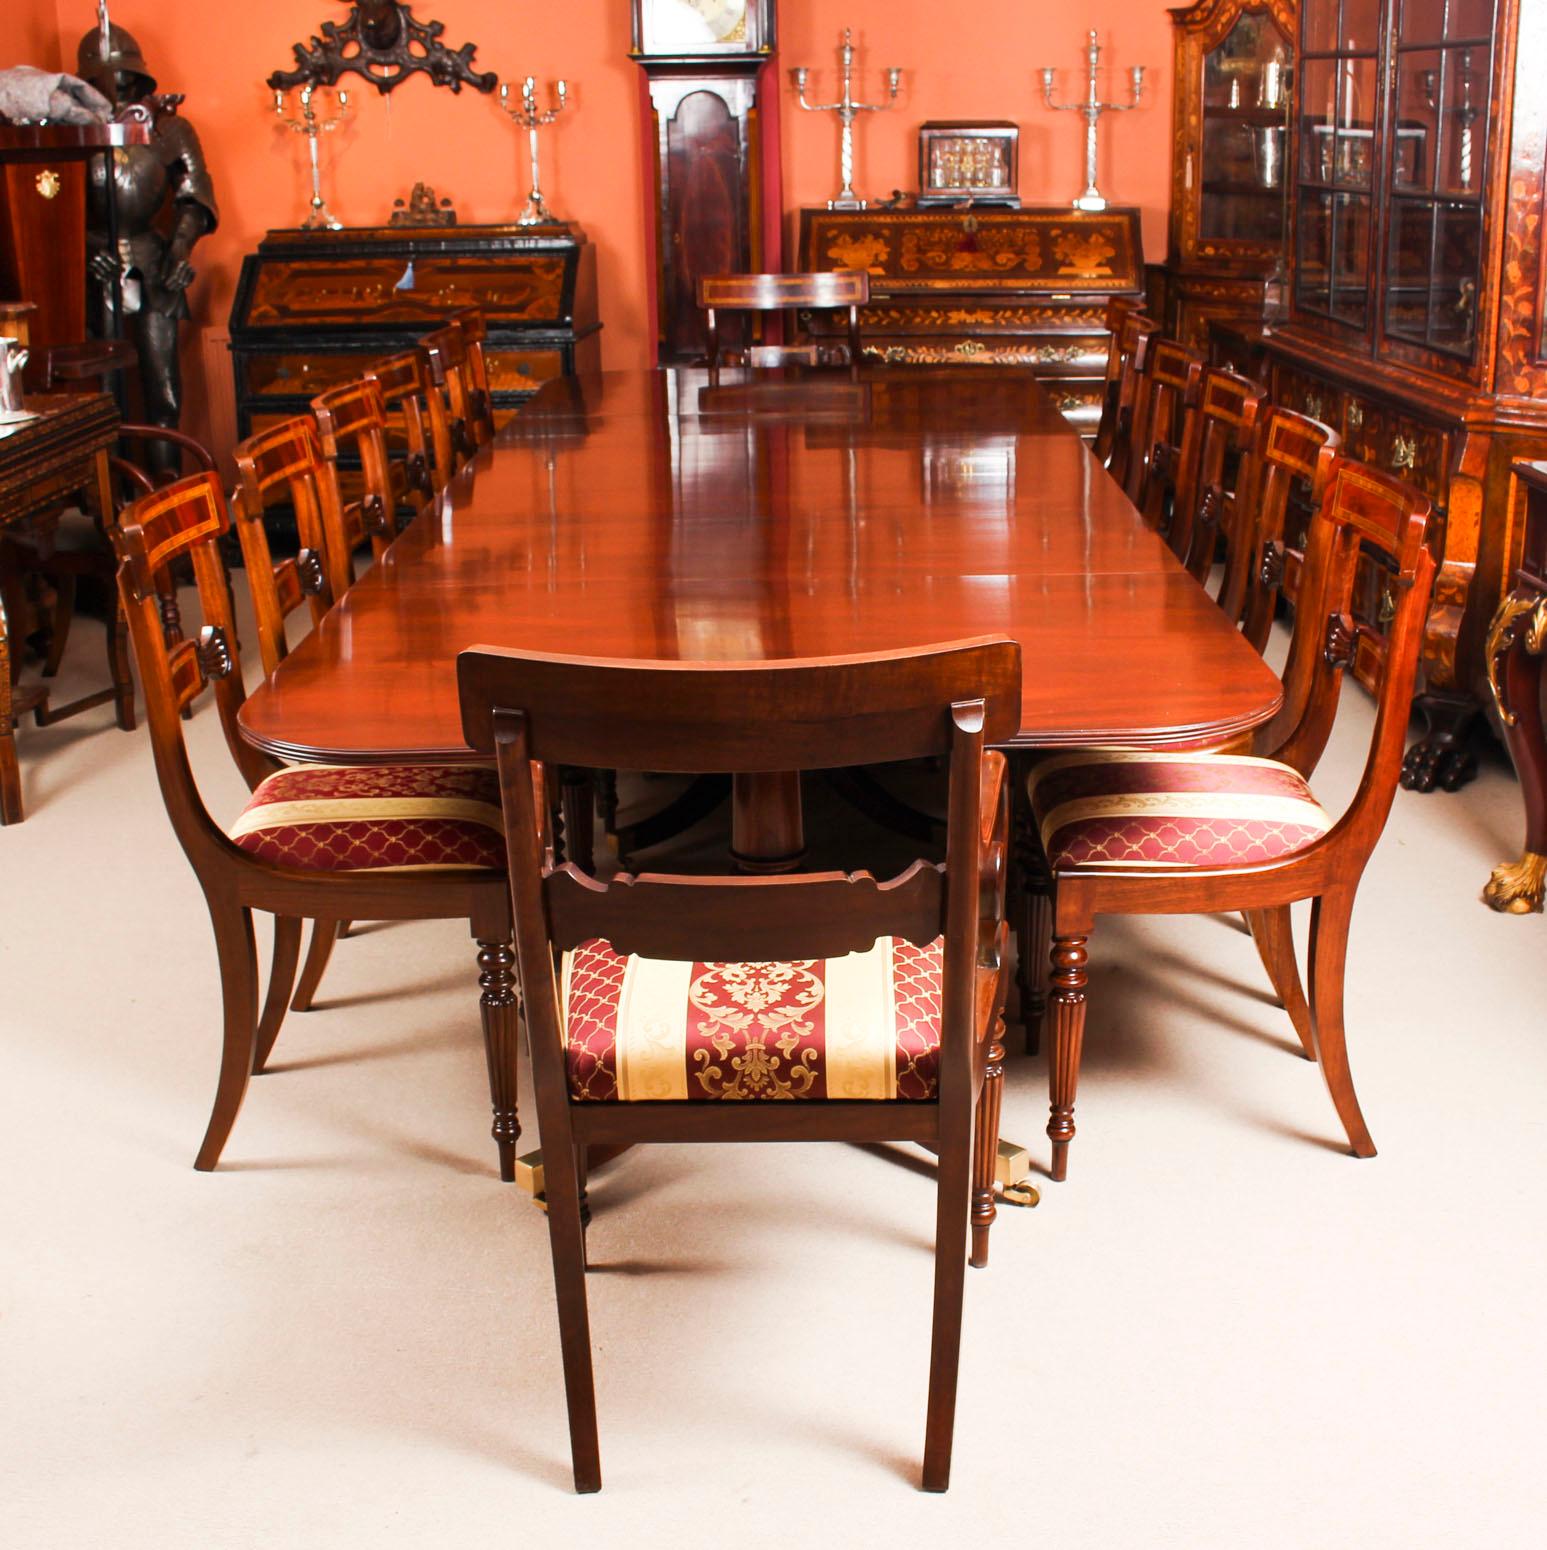 This is fabulous Vintage dining set comprising a Regency style dining table by William Tillman, Circa 1980 in date and a matching set of twelve dining chairs.

The table is made of stunning solid flame mahogany and is raised on three 